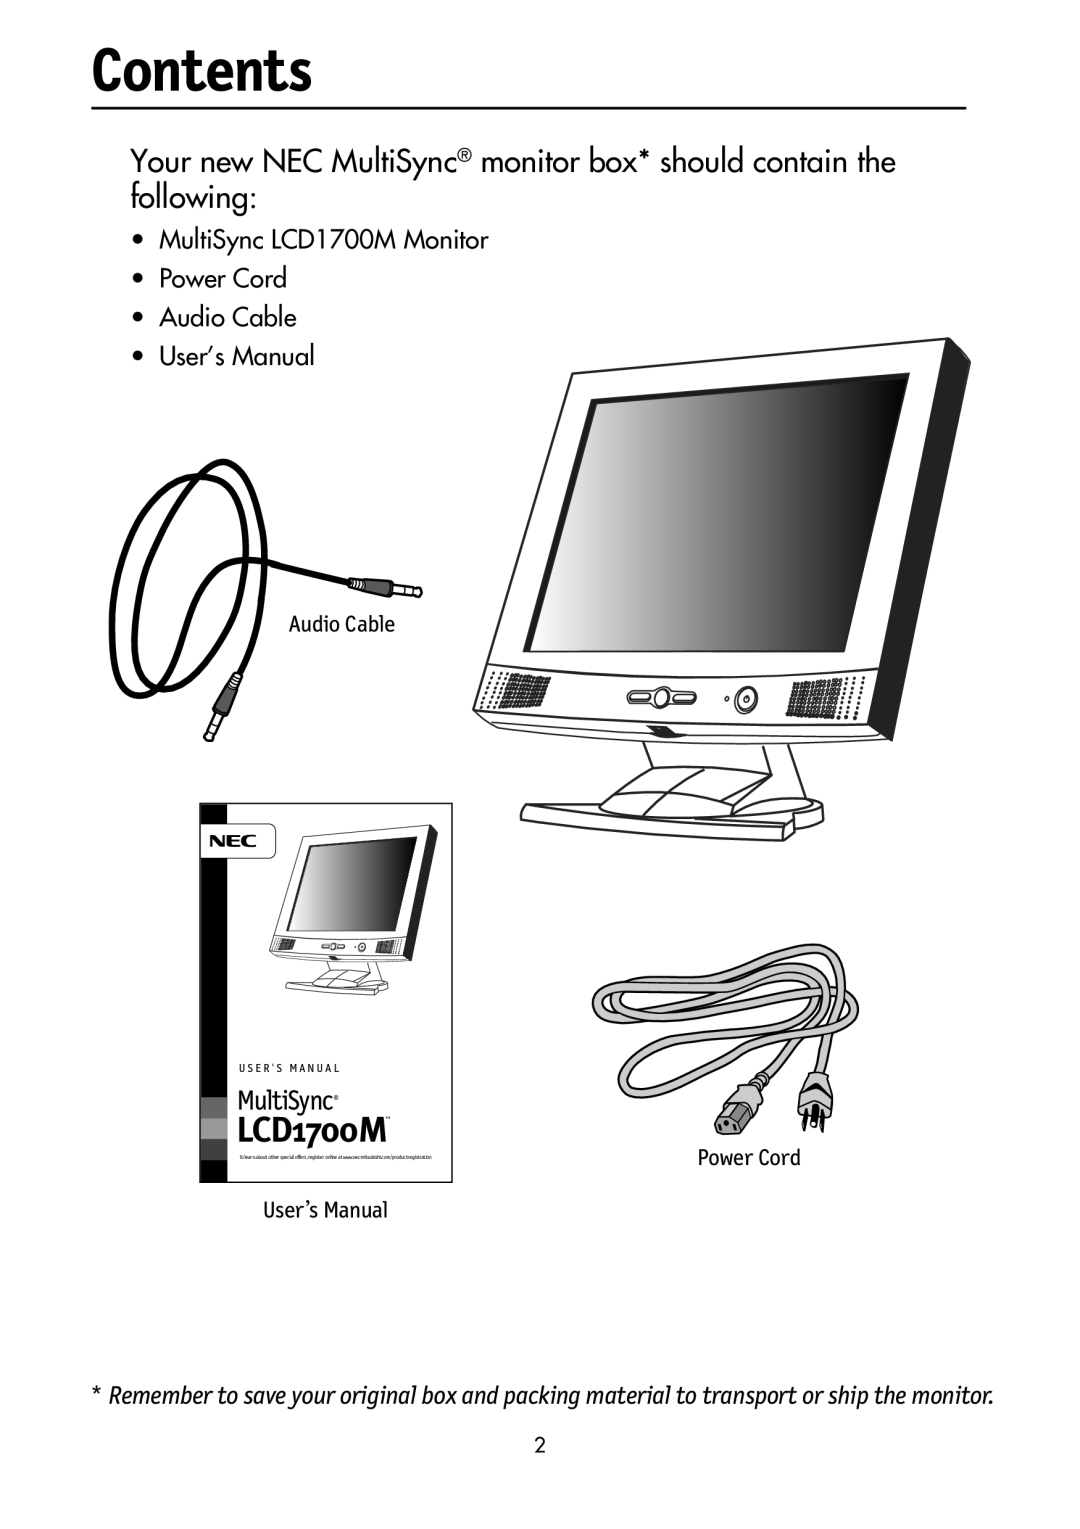 NEC LCD1700M Contents, Your new NEC MultiSync monitor box* should contain the following, Audio Cable, User’s Manual 